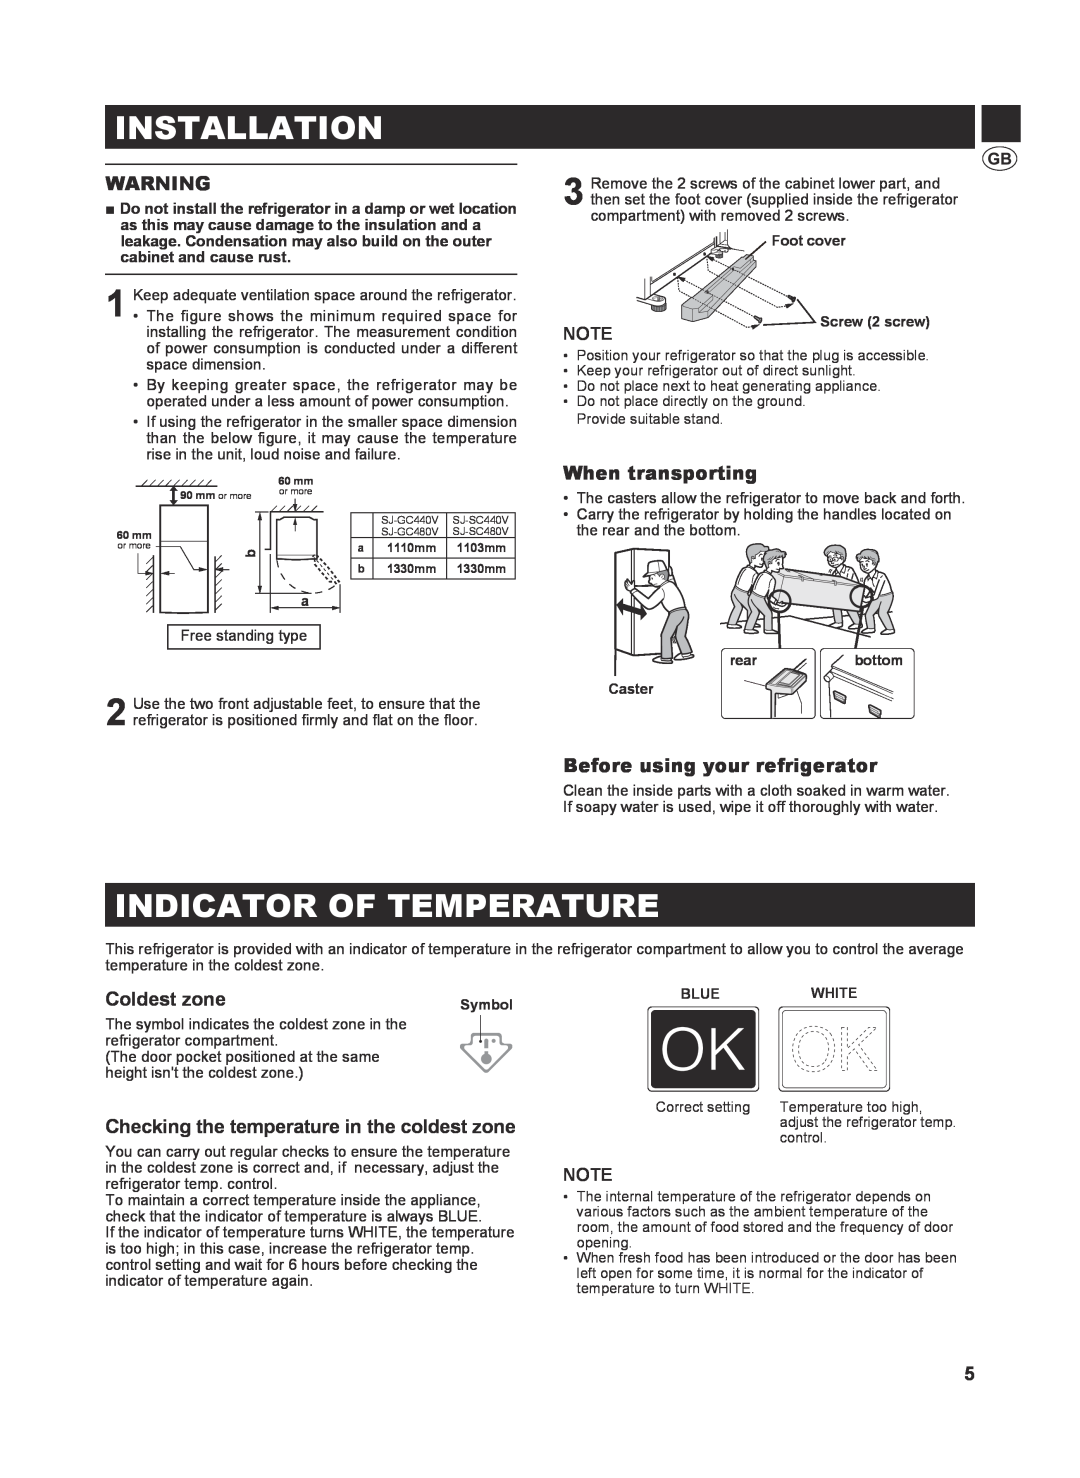 Sharp SJ-SC440V Installation, Indicator Of Temperature, When transporting, Before using your refrigerator, Coldest zone 